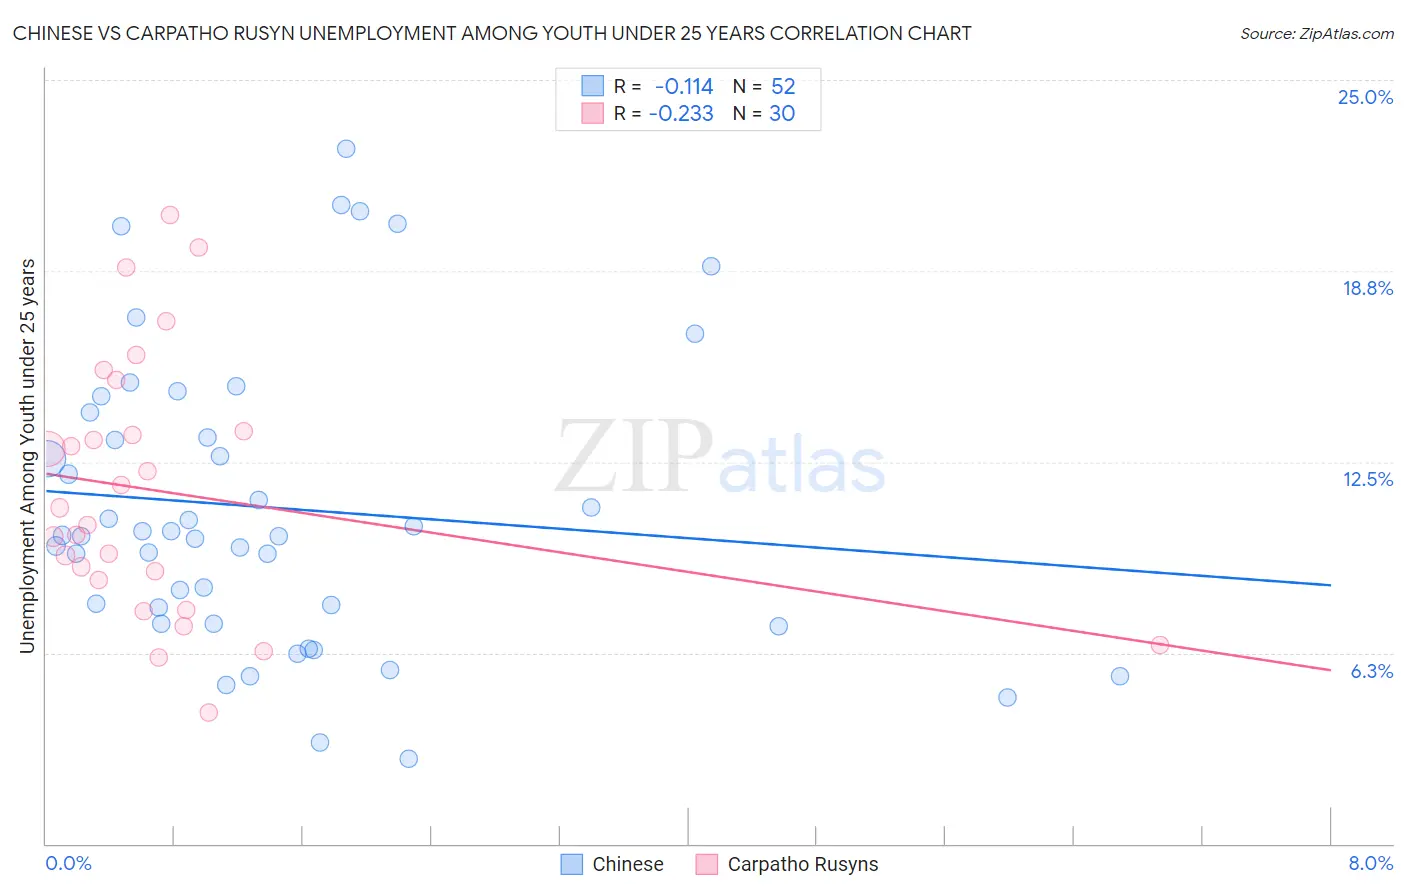 Chinese vs Carpatho Rusyn Unemployment Among Youth under 25 years